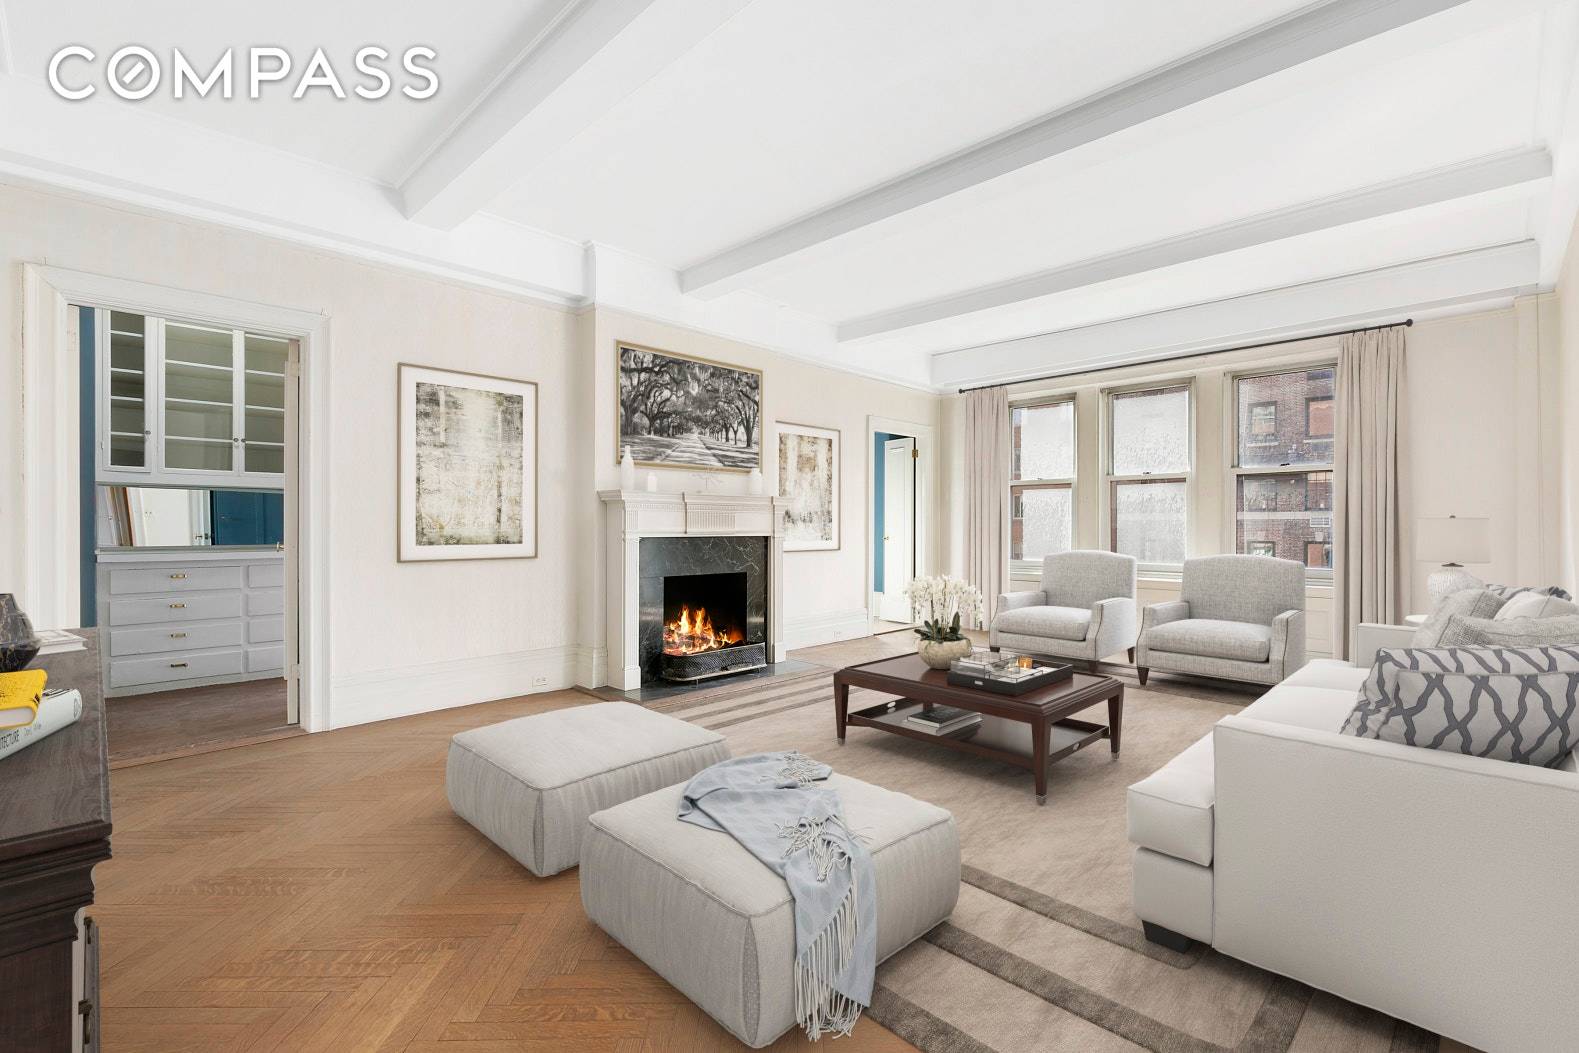 Create the perfect modern meets classic home in this sprawling four bedroom, four bathroom residence awaiting your vision and style in a full service Upper East Side cooperative.